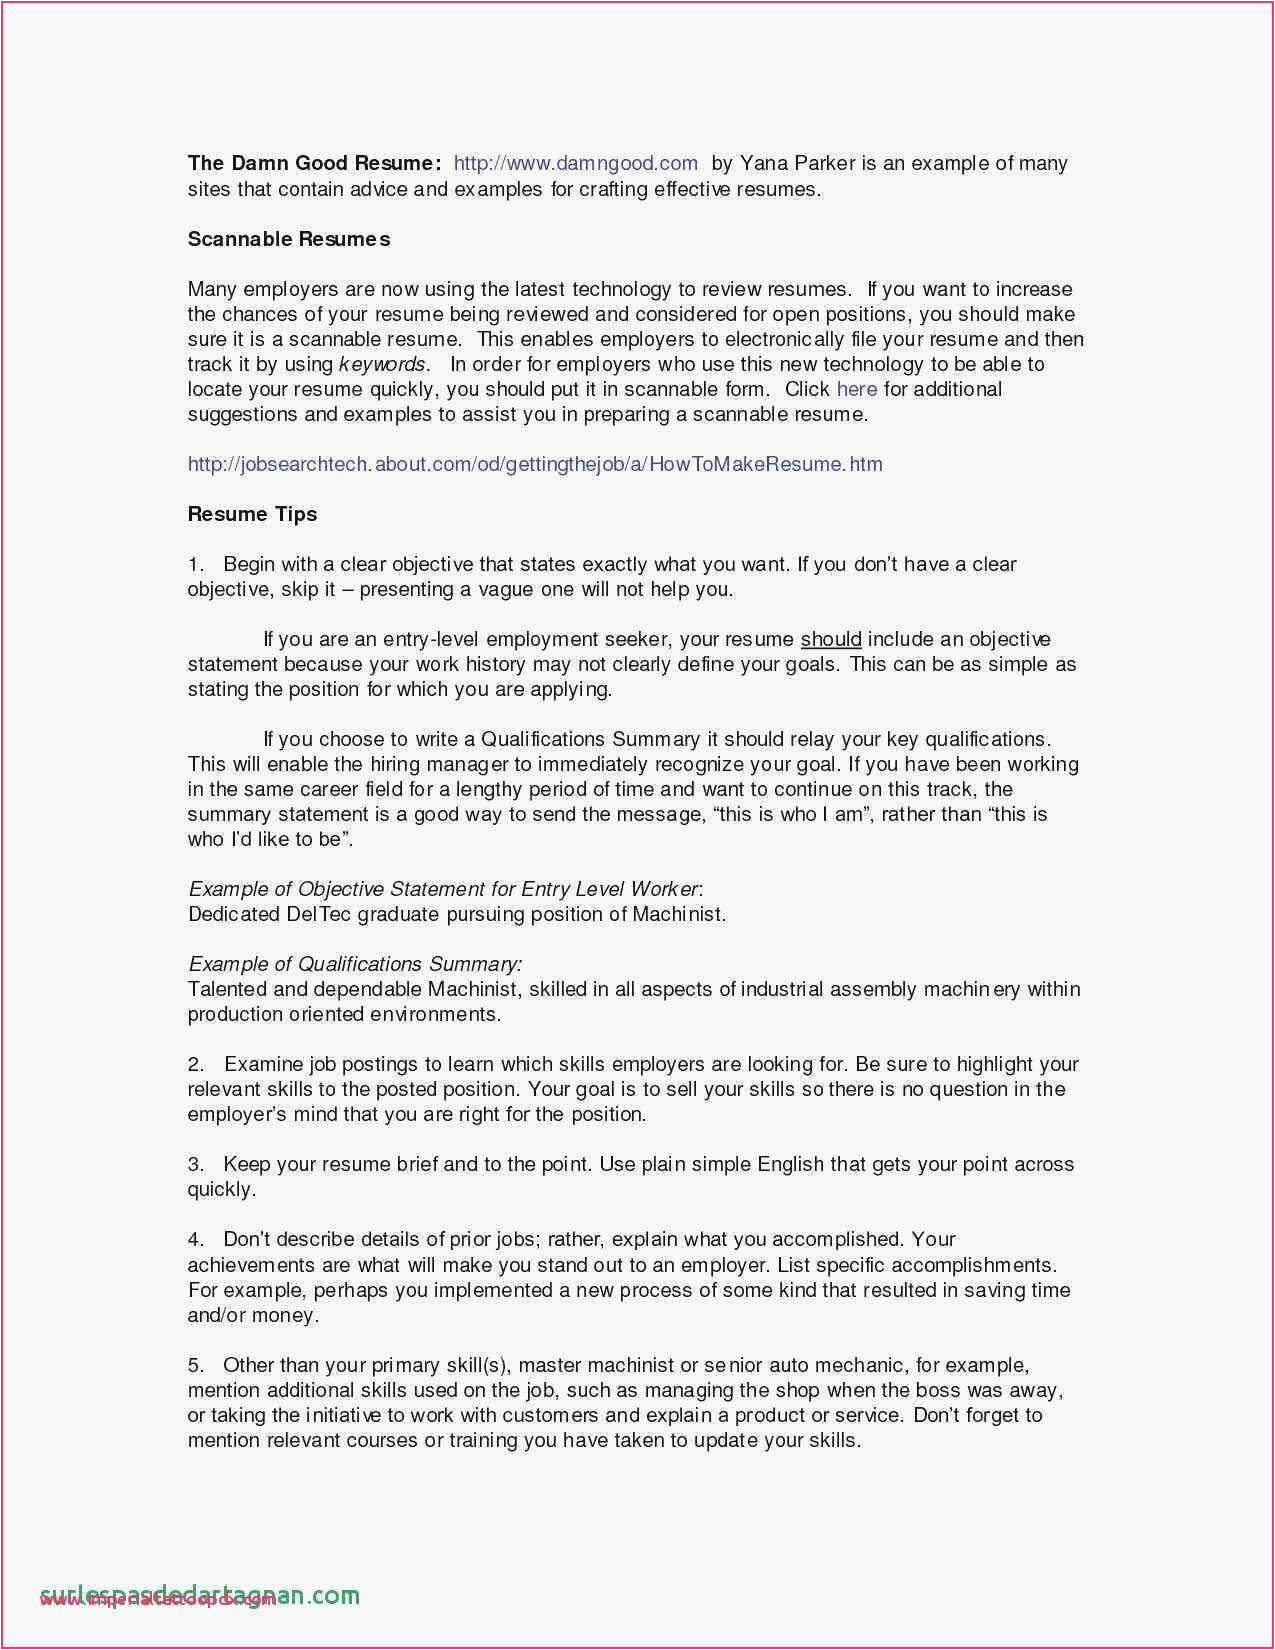 Sample Resume for Pharmacist In the Philippines Pharmacy School Personal Statement Examples